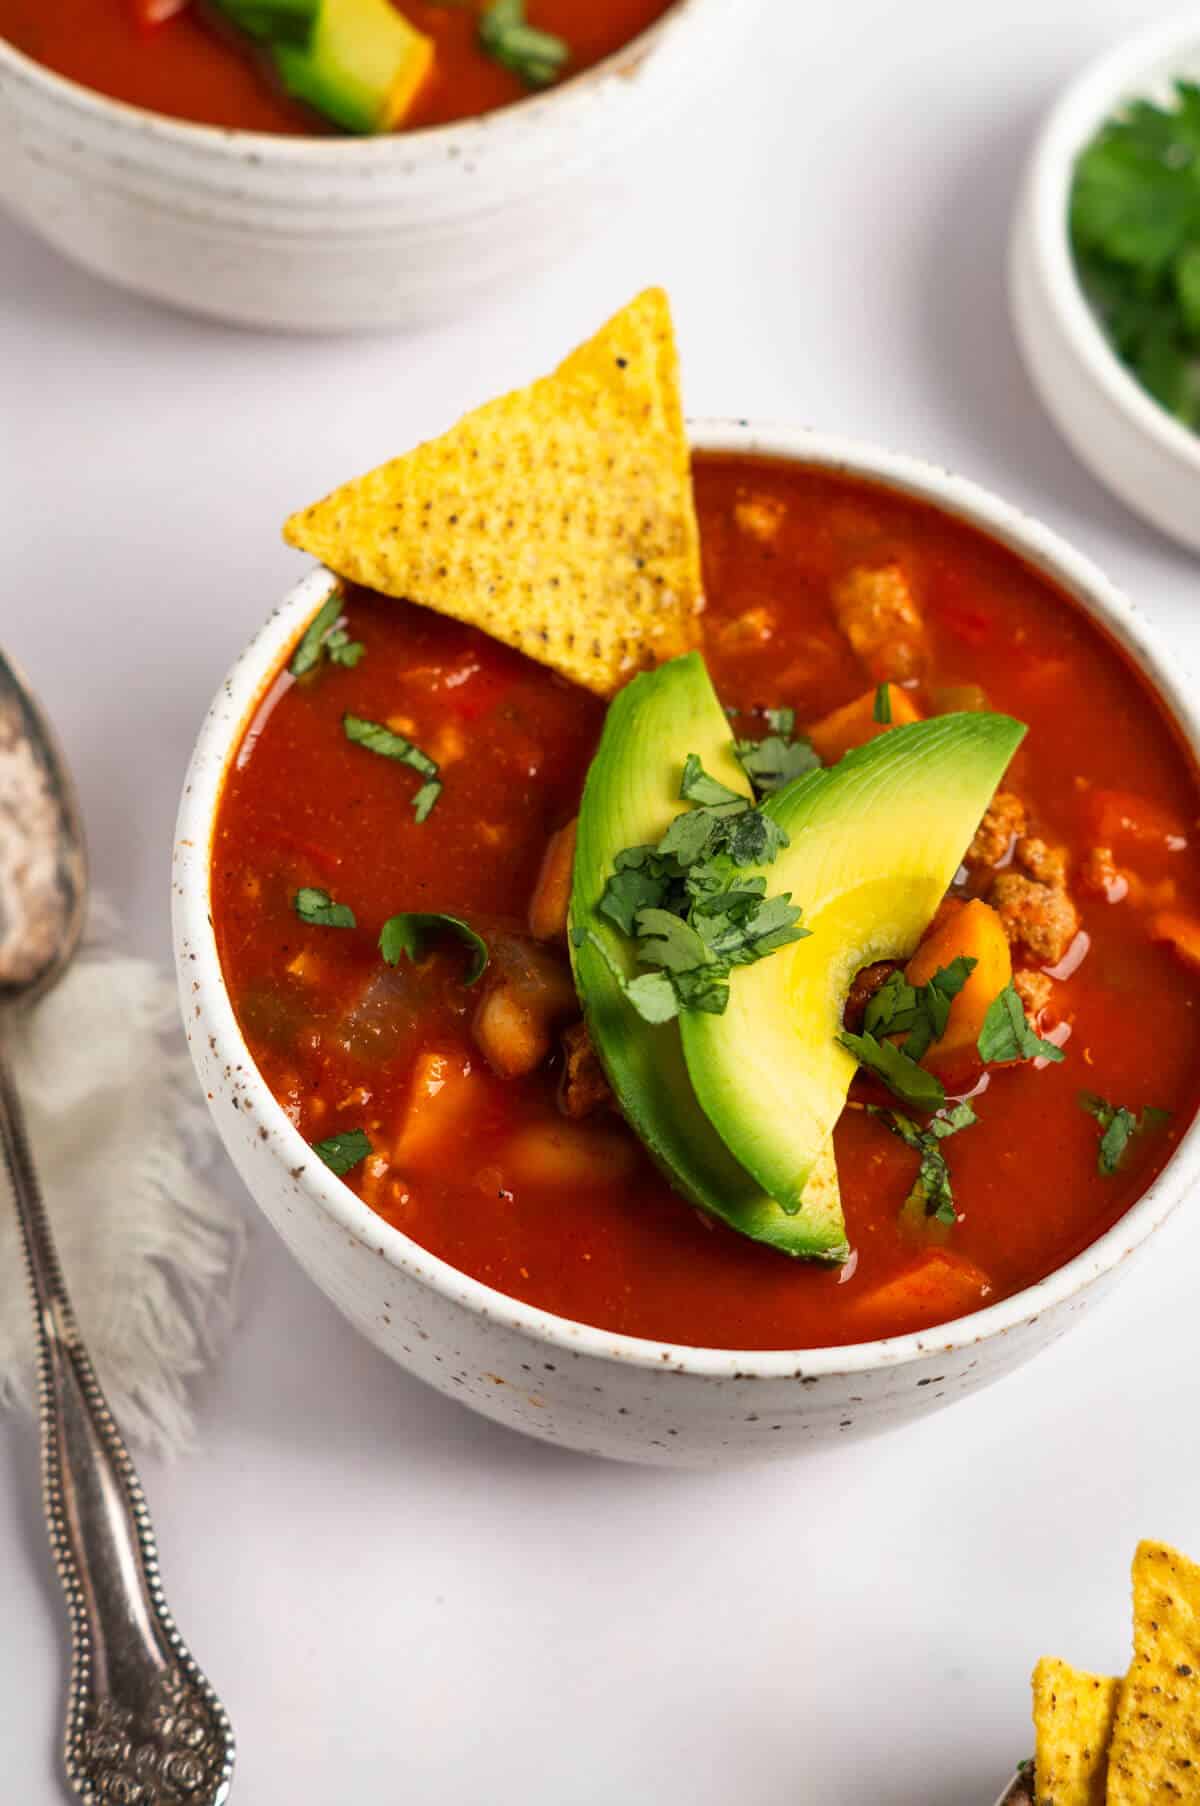 A bowl of turkey sweet potato chili garnished with avocado slices, chopped cilantro, and tortilla chips.